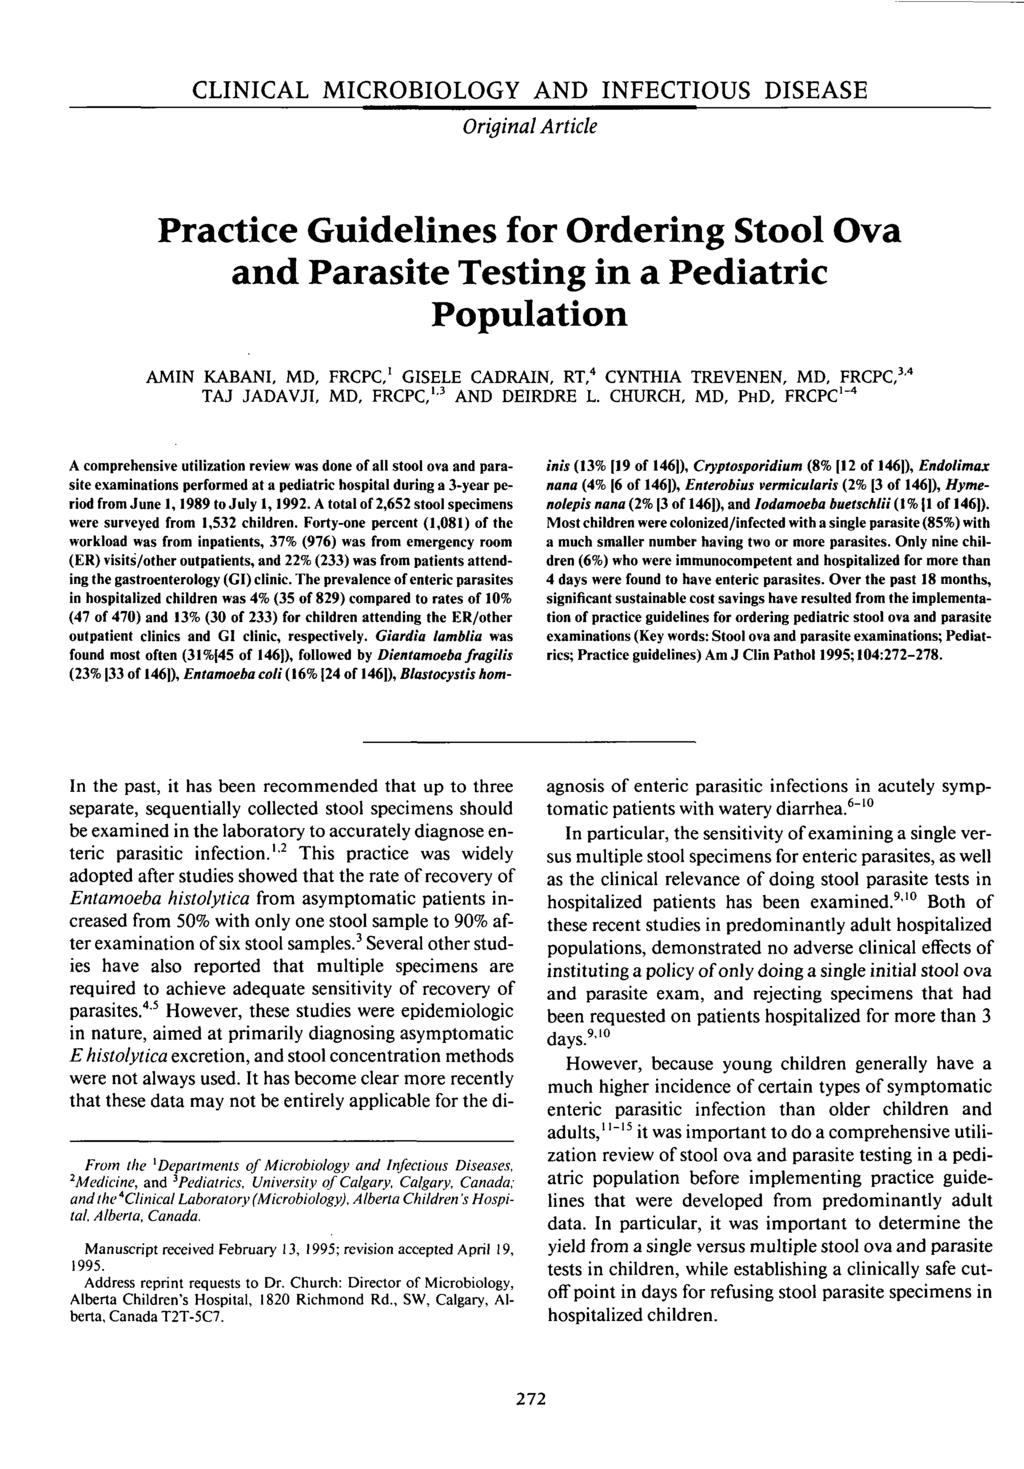 CLINICAL MICROBIOLOGY AND INFECTIOUS DISEASE Original Article Practice Guidelines for Ordering Stool Ova and Parasite Testing in a Pediatric Population AMIN KABANI, MD, FRCPC, GISELE CADRAIN, RT,